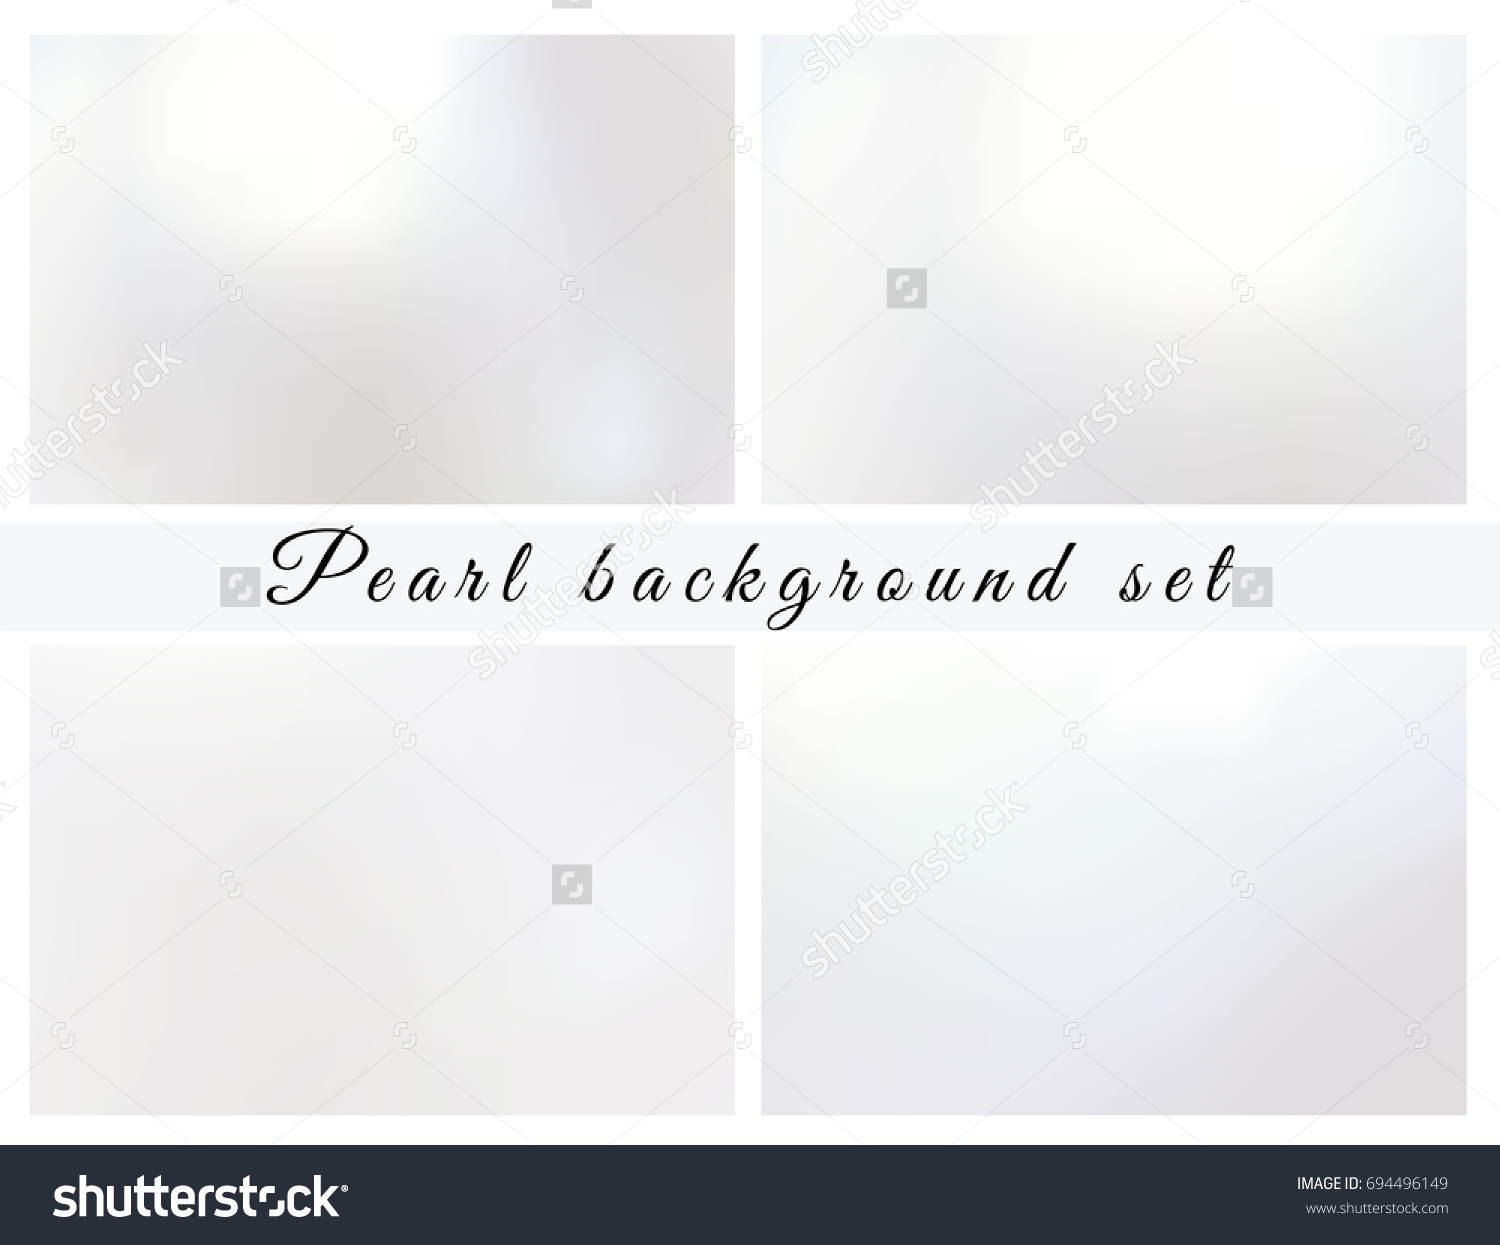 Pearl background set. Shiny wallpaper. Card template. Light paper. White texture. Made with mesh gradient without clipping mask. Vector illustration . #694496149